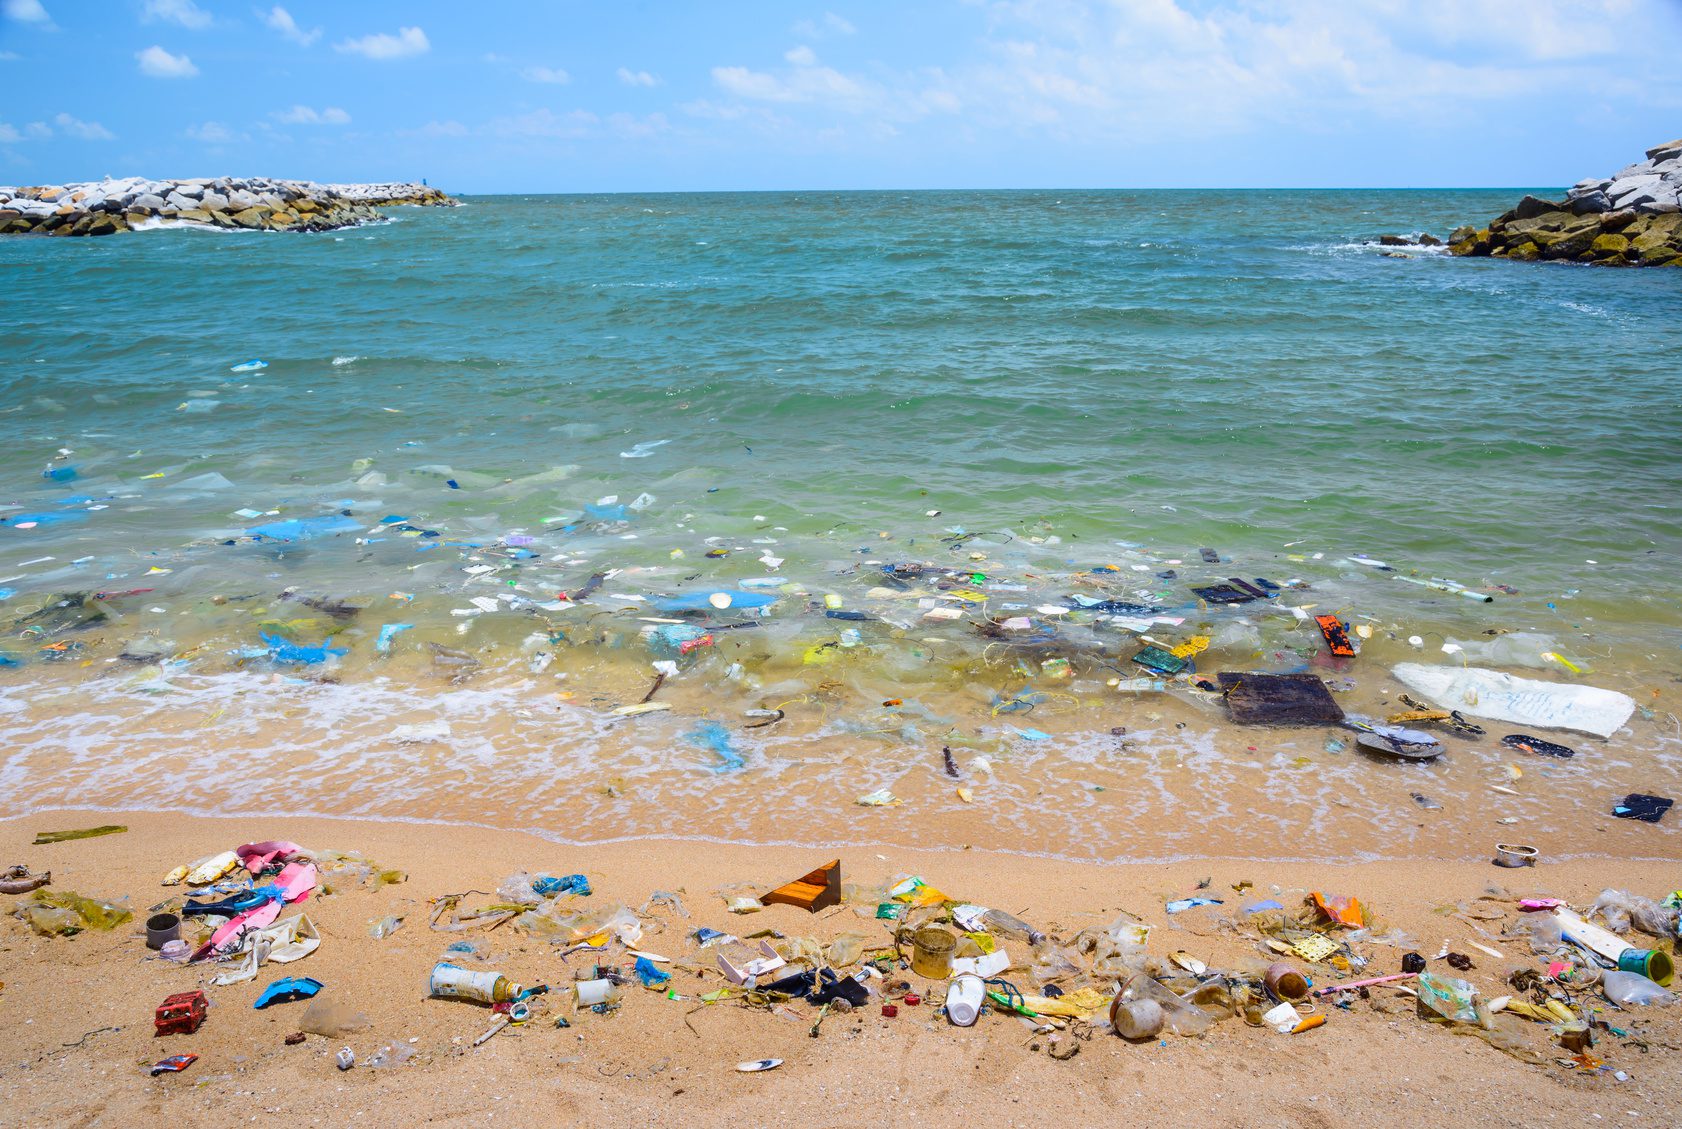 The first stretch of ocean filled with microplastics, shorelines and garbage.  Concept: Coca-Cola among the main culprits of pollution